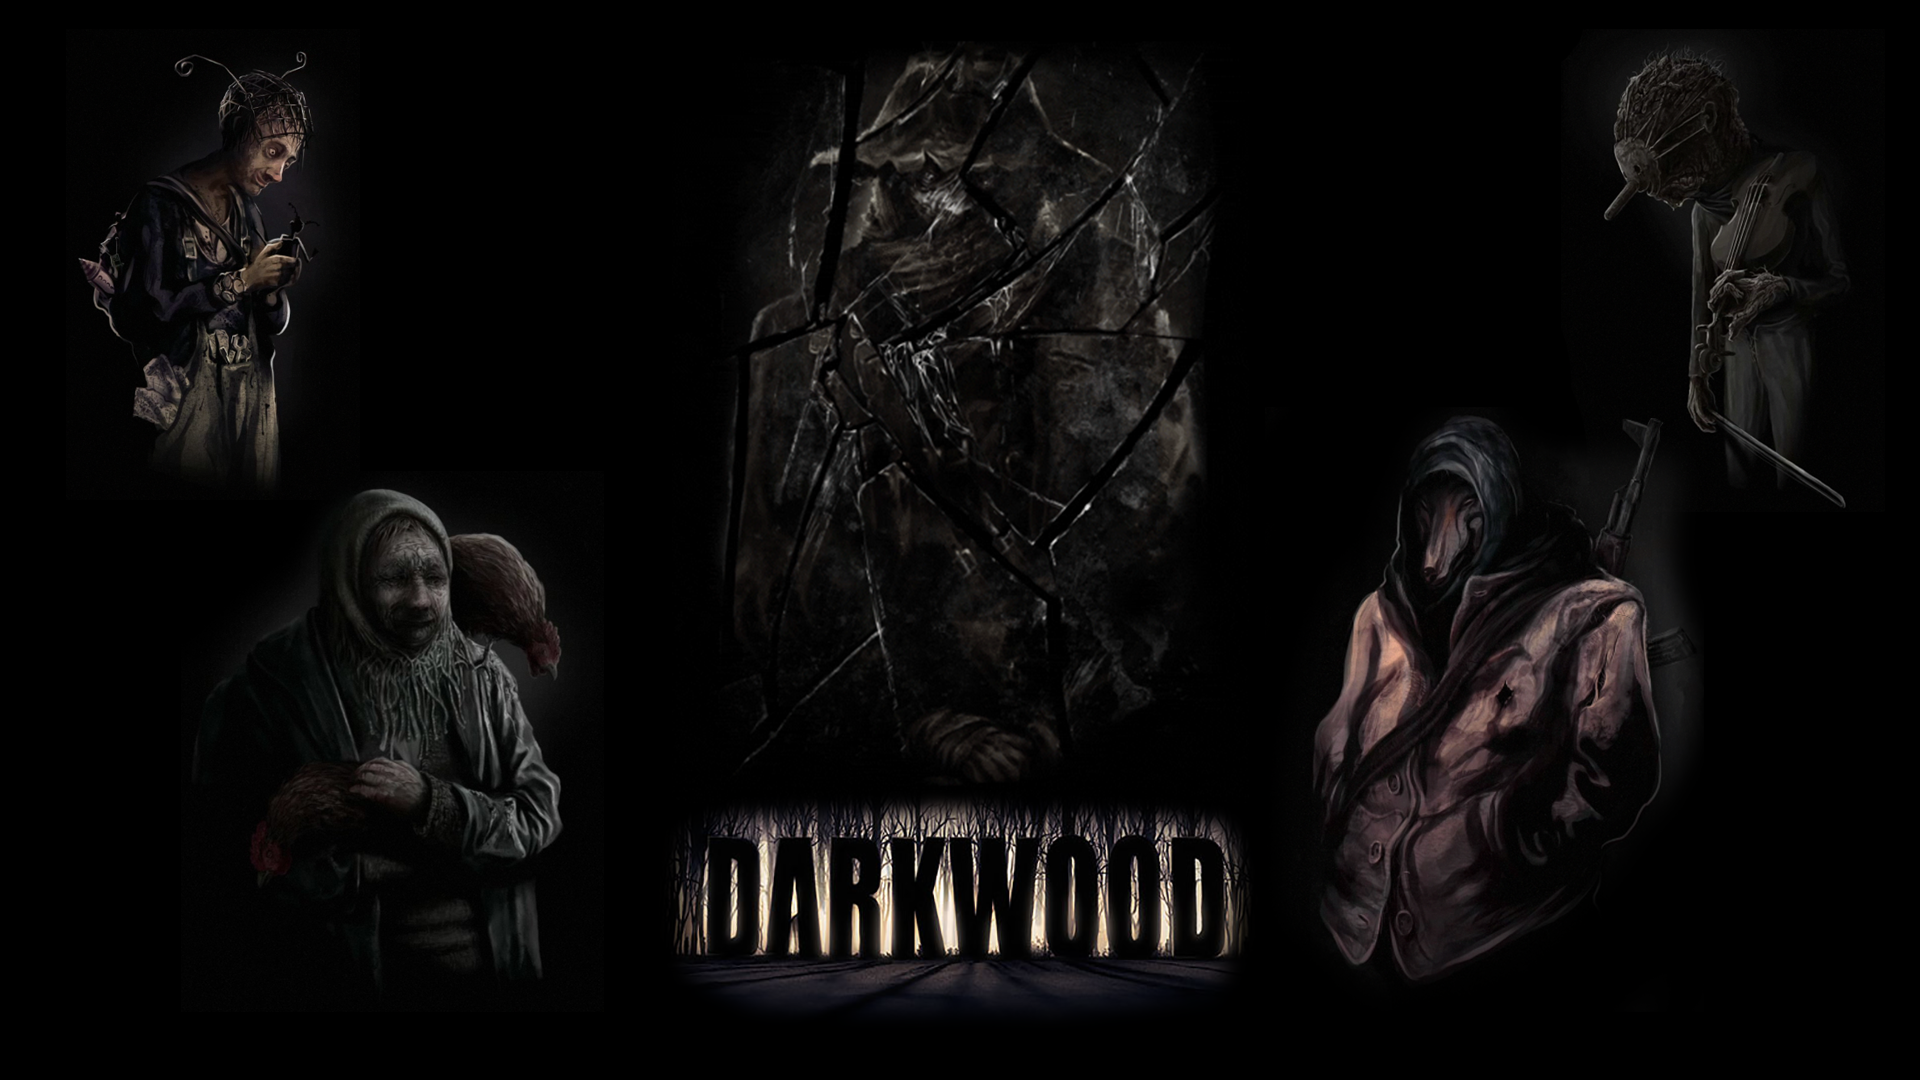 Dark Wood Wallpapers 1920x1080 posted by Sarah Anderson.